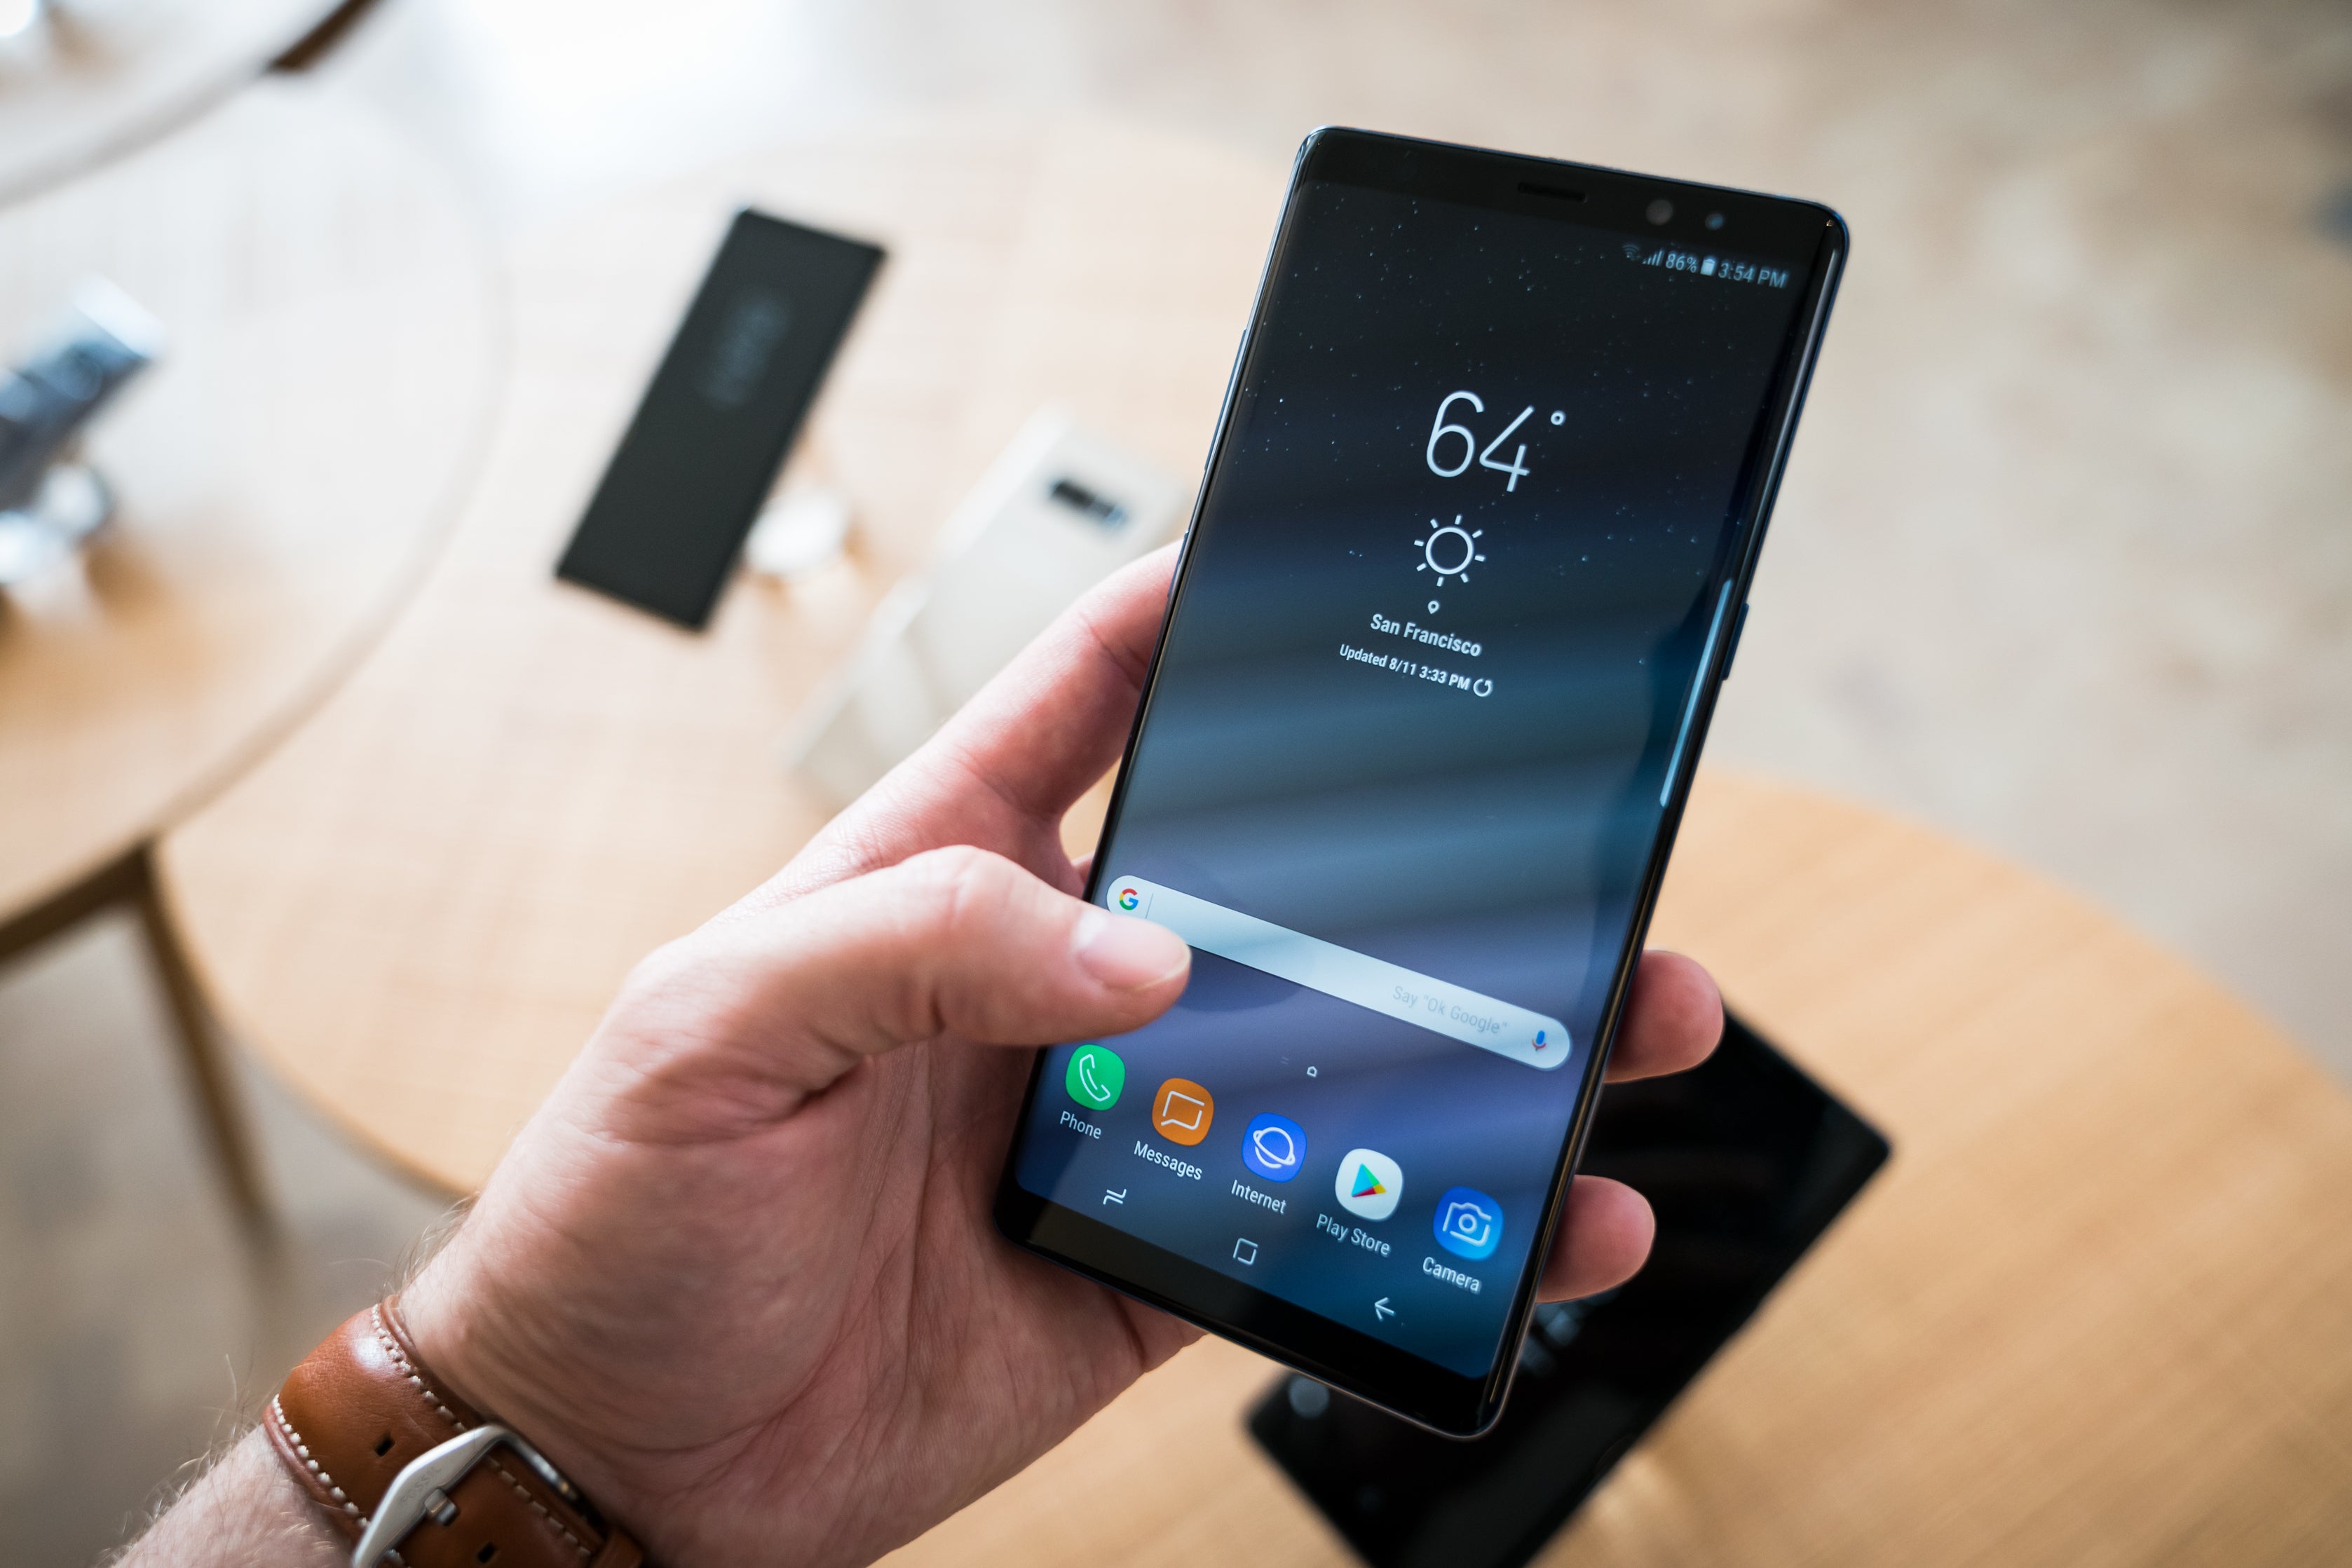 Galaxy Note 8 hands-on: This is how Samsung will make you forget Note 7